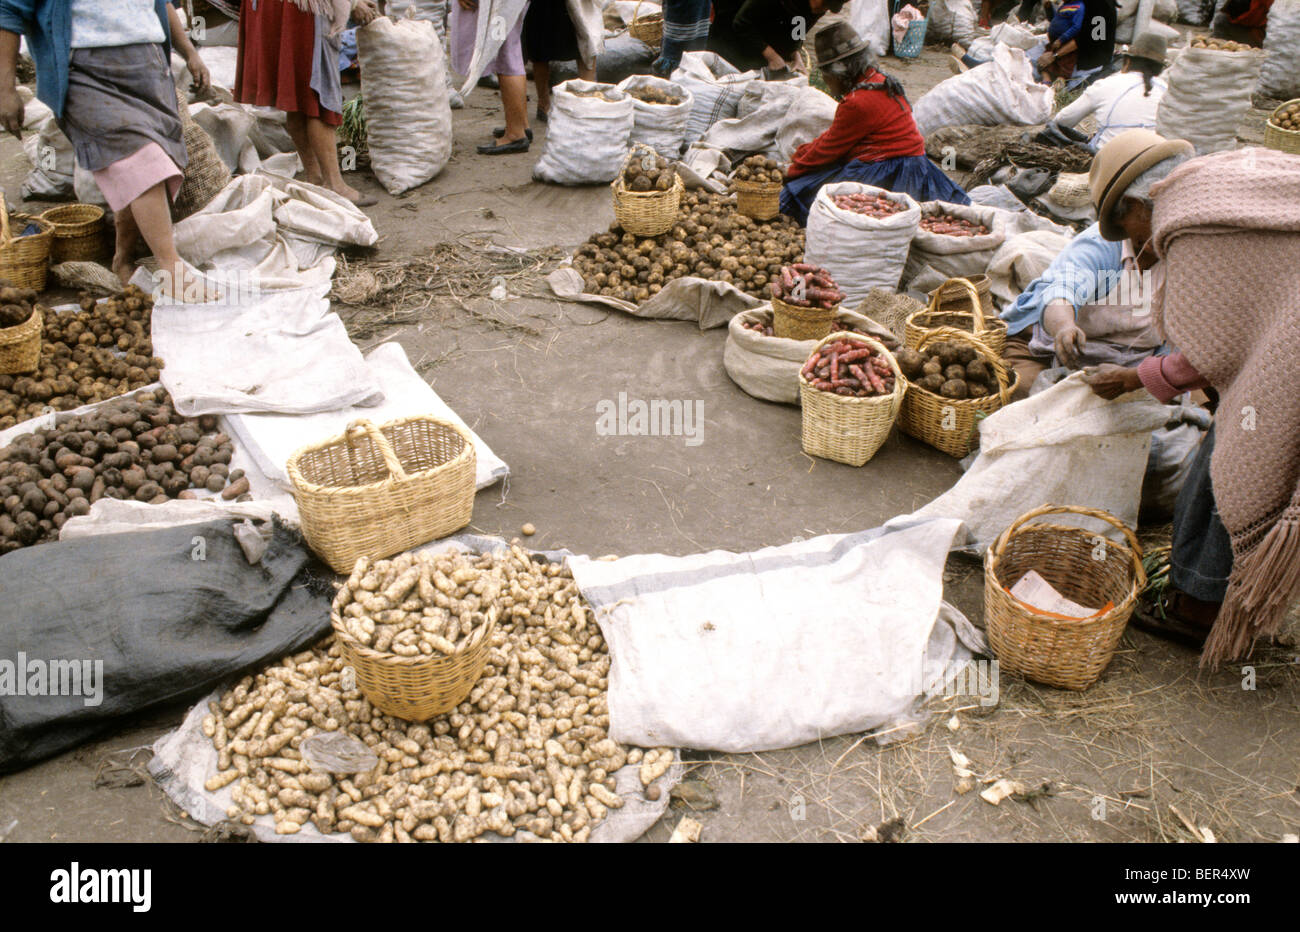 Many varieties of different potatoes on ground in piles and in small sacks.  Ecuador highlands local market. Stock Photo